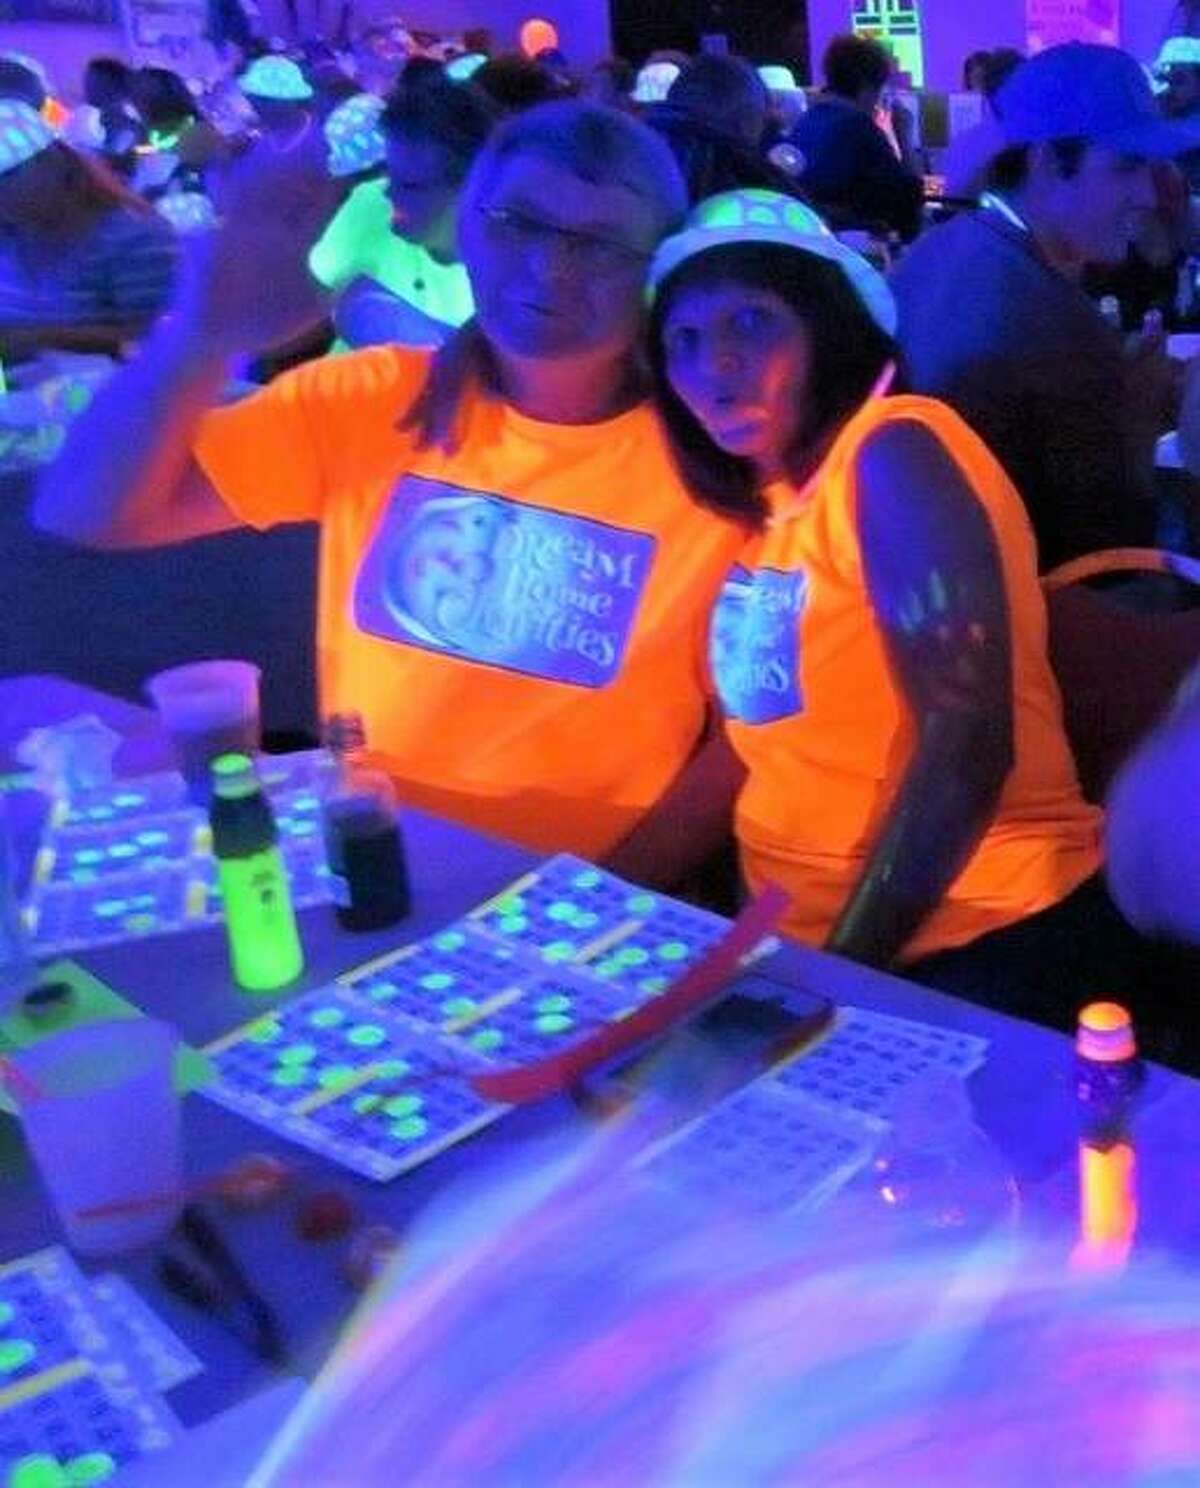 Also Saturday, get your glow sticks ready for Glo Bingo to support Dream Home Charities at 7 p.m. at the Alton VFW Post 1308, 4445 N. Alby St., in Alton. Dream Home Charities helps multiple local charity organizations help the less fortunate. It’s 100% volunteer and 100% of all donations given to them are given back to the local community where it’s needed most. Tickets cost $30 per person in advance or $35 at the door. Price includes six bingo cards, a glow dabber, glow hat and dinner. Additional bingo cards cost $5. For advance reservations contact Sherry Gilleland at 618-779-0990 or Dream Home Realty Centre Inc. at 618-497-4663.